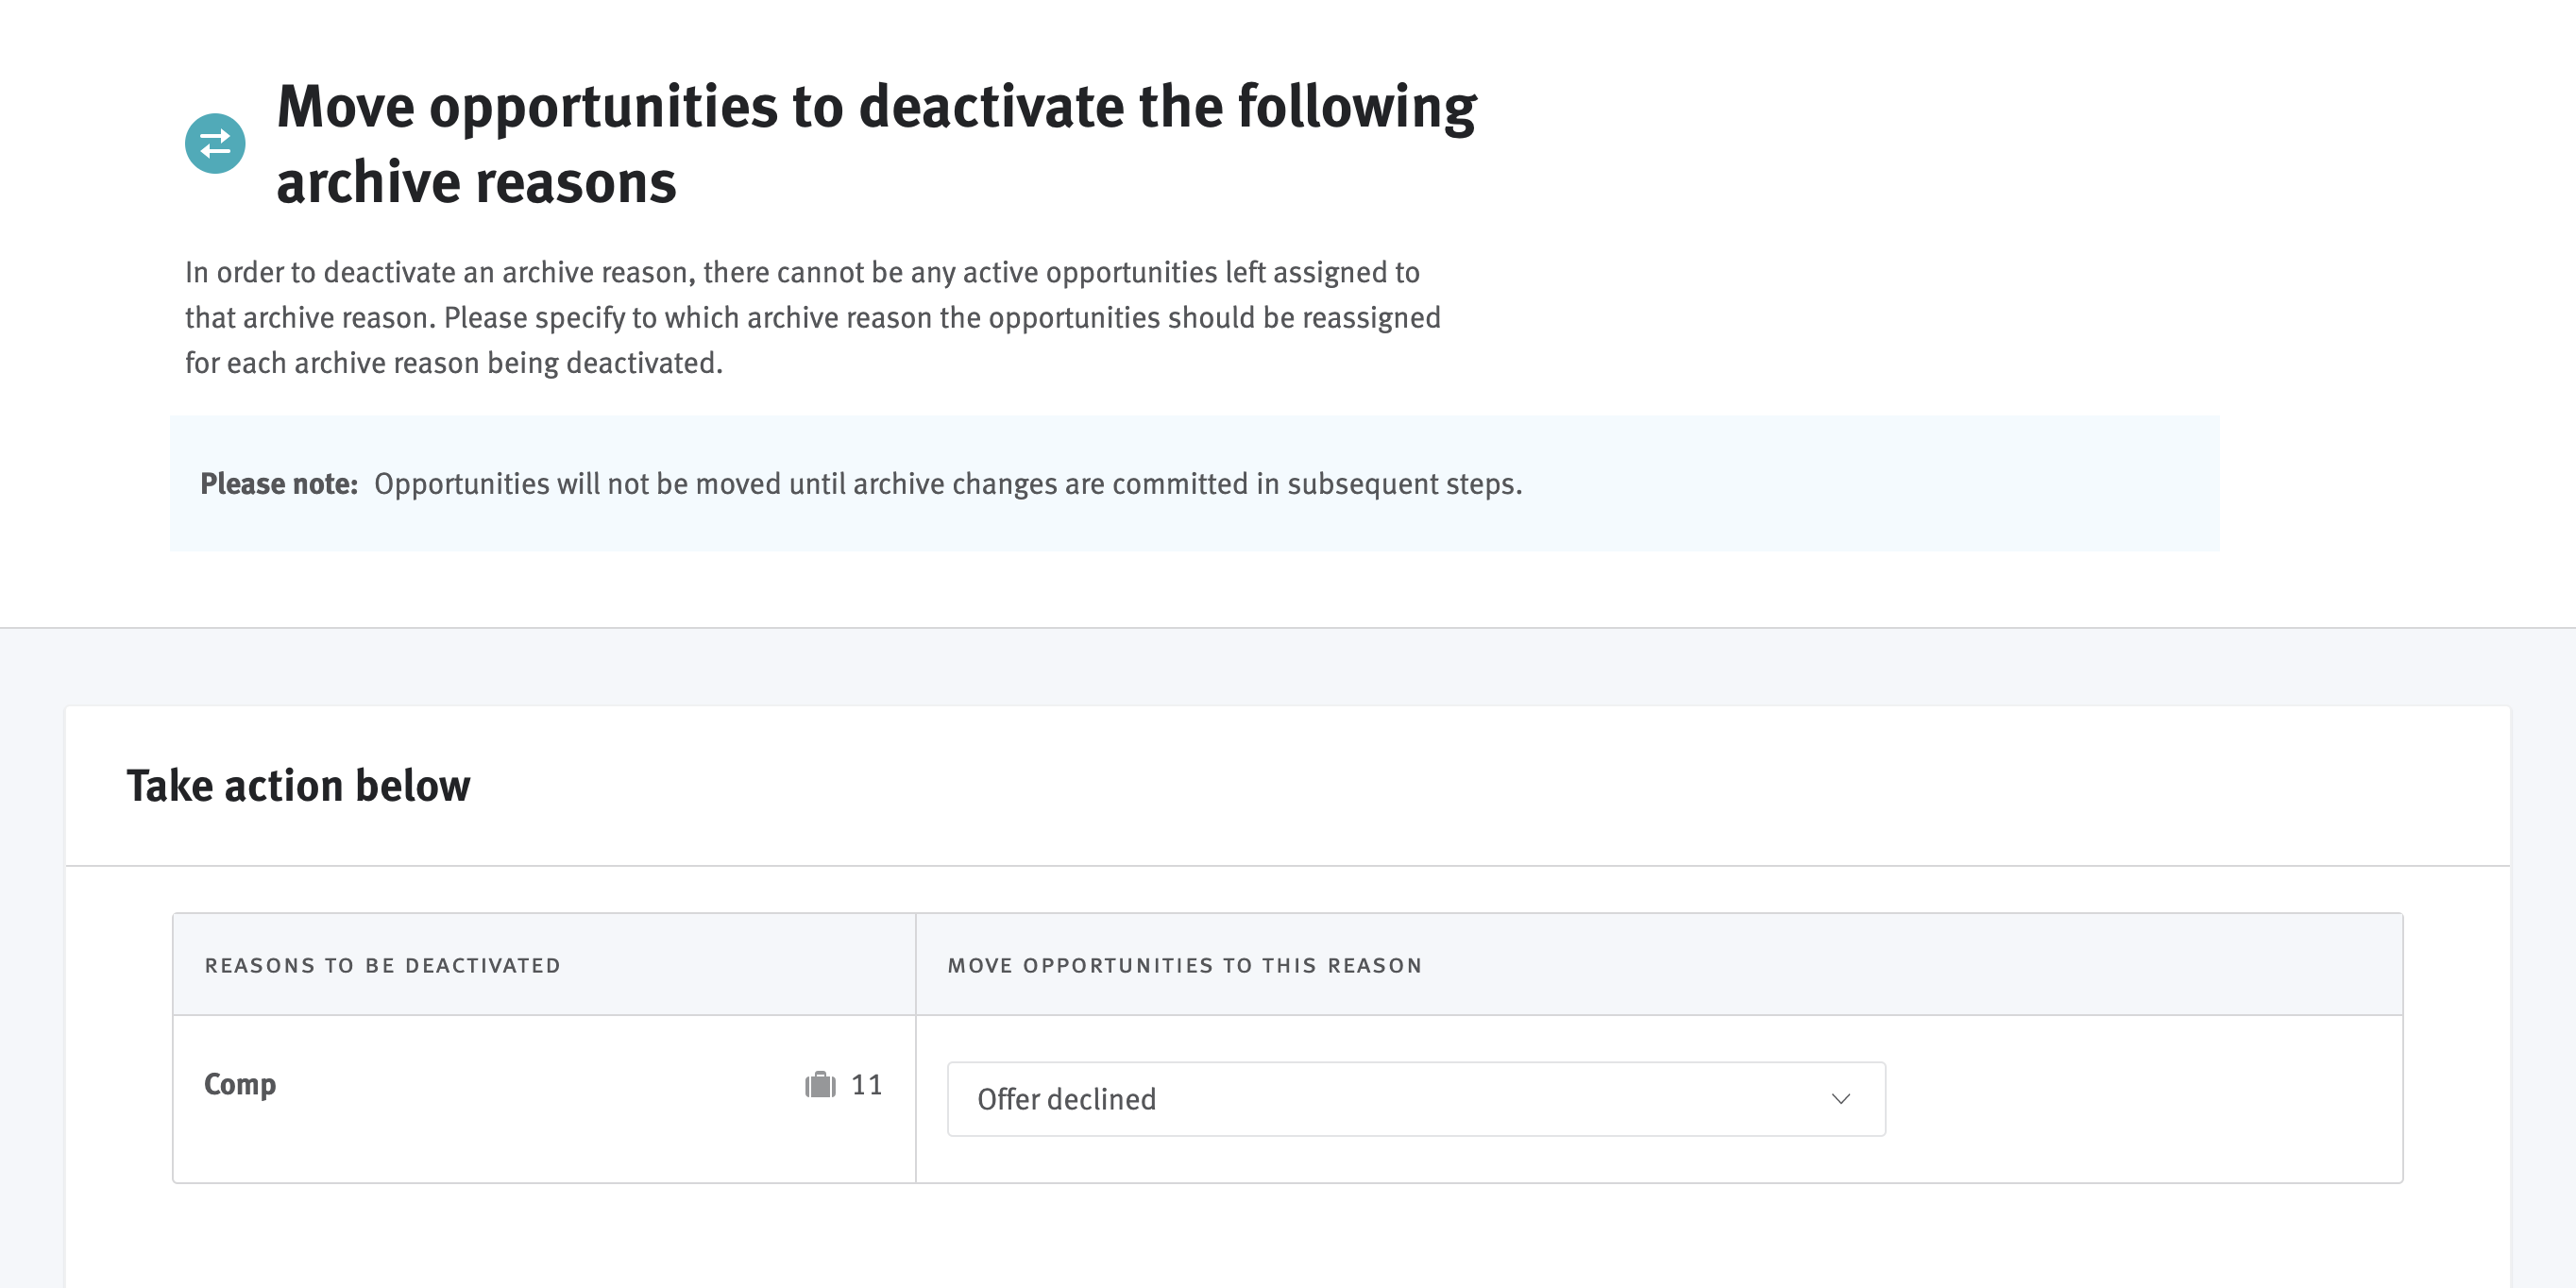 Move opportunities page in archive reason configuration workflow. One reason slated for deactivation is listed with a new reason selected to which to reattribute opportunities.